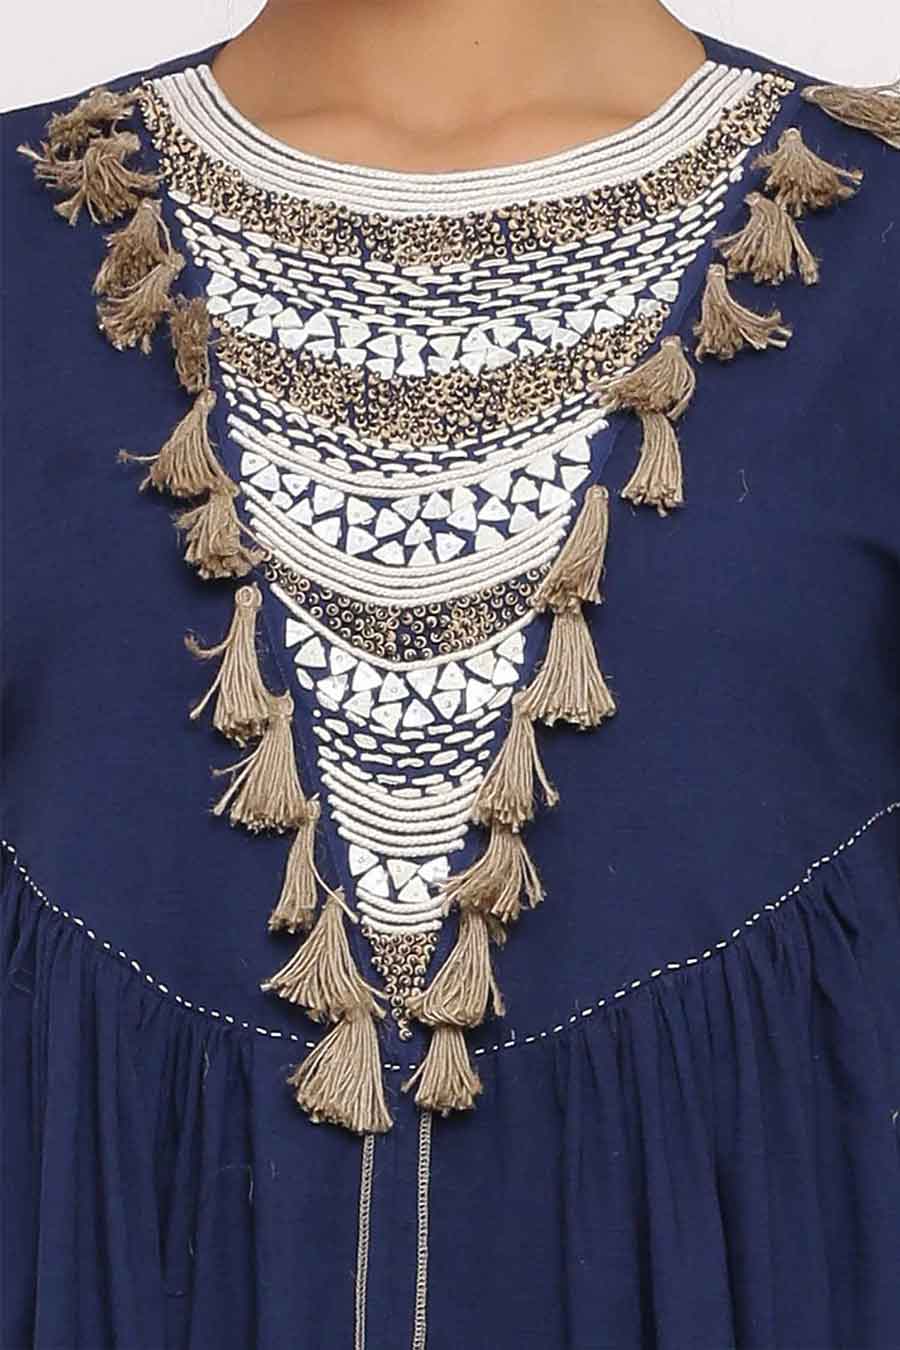 Baro Navy Blue Embroidered Dress